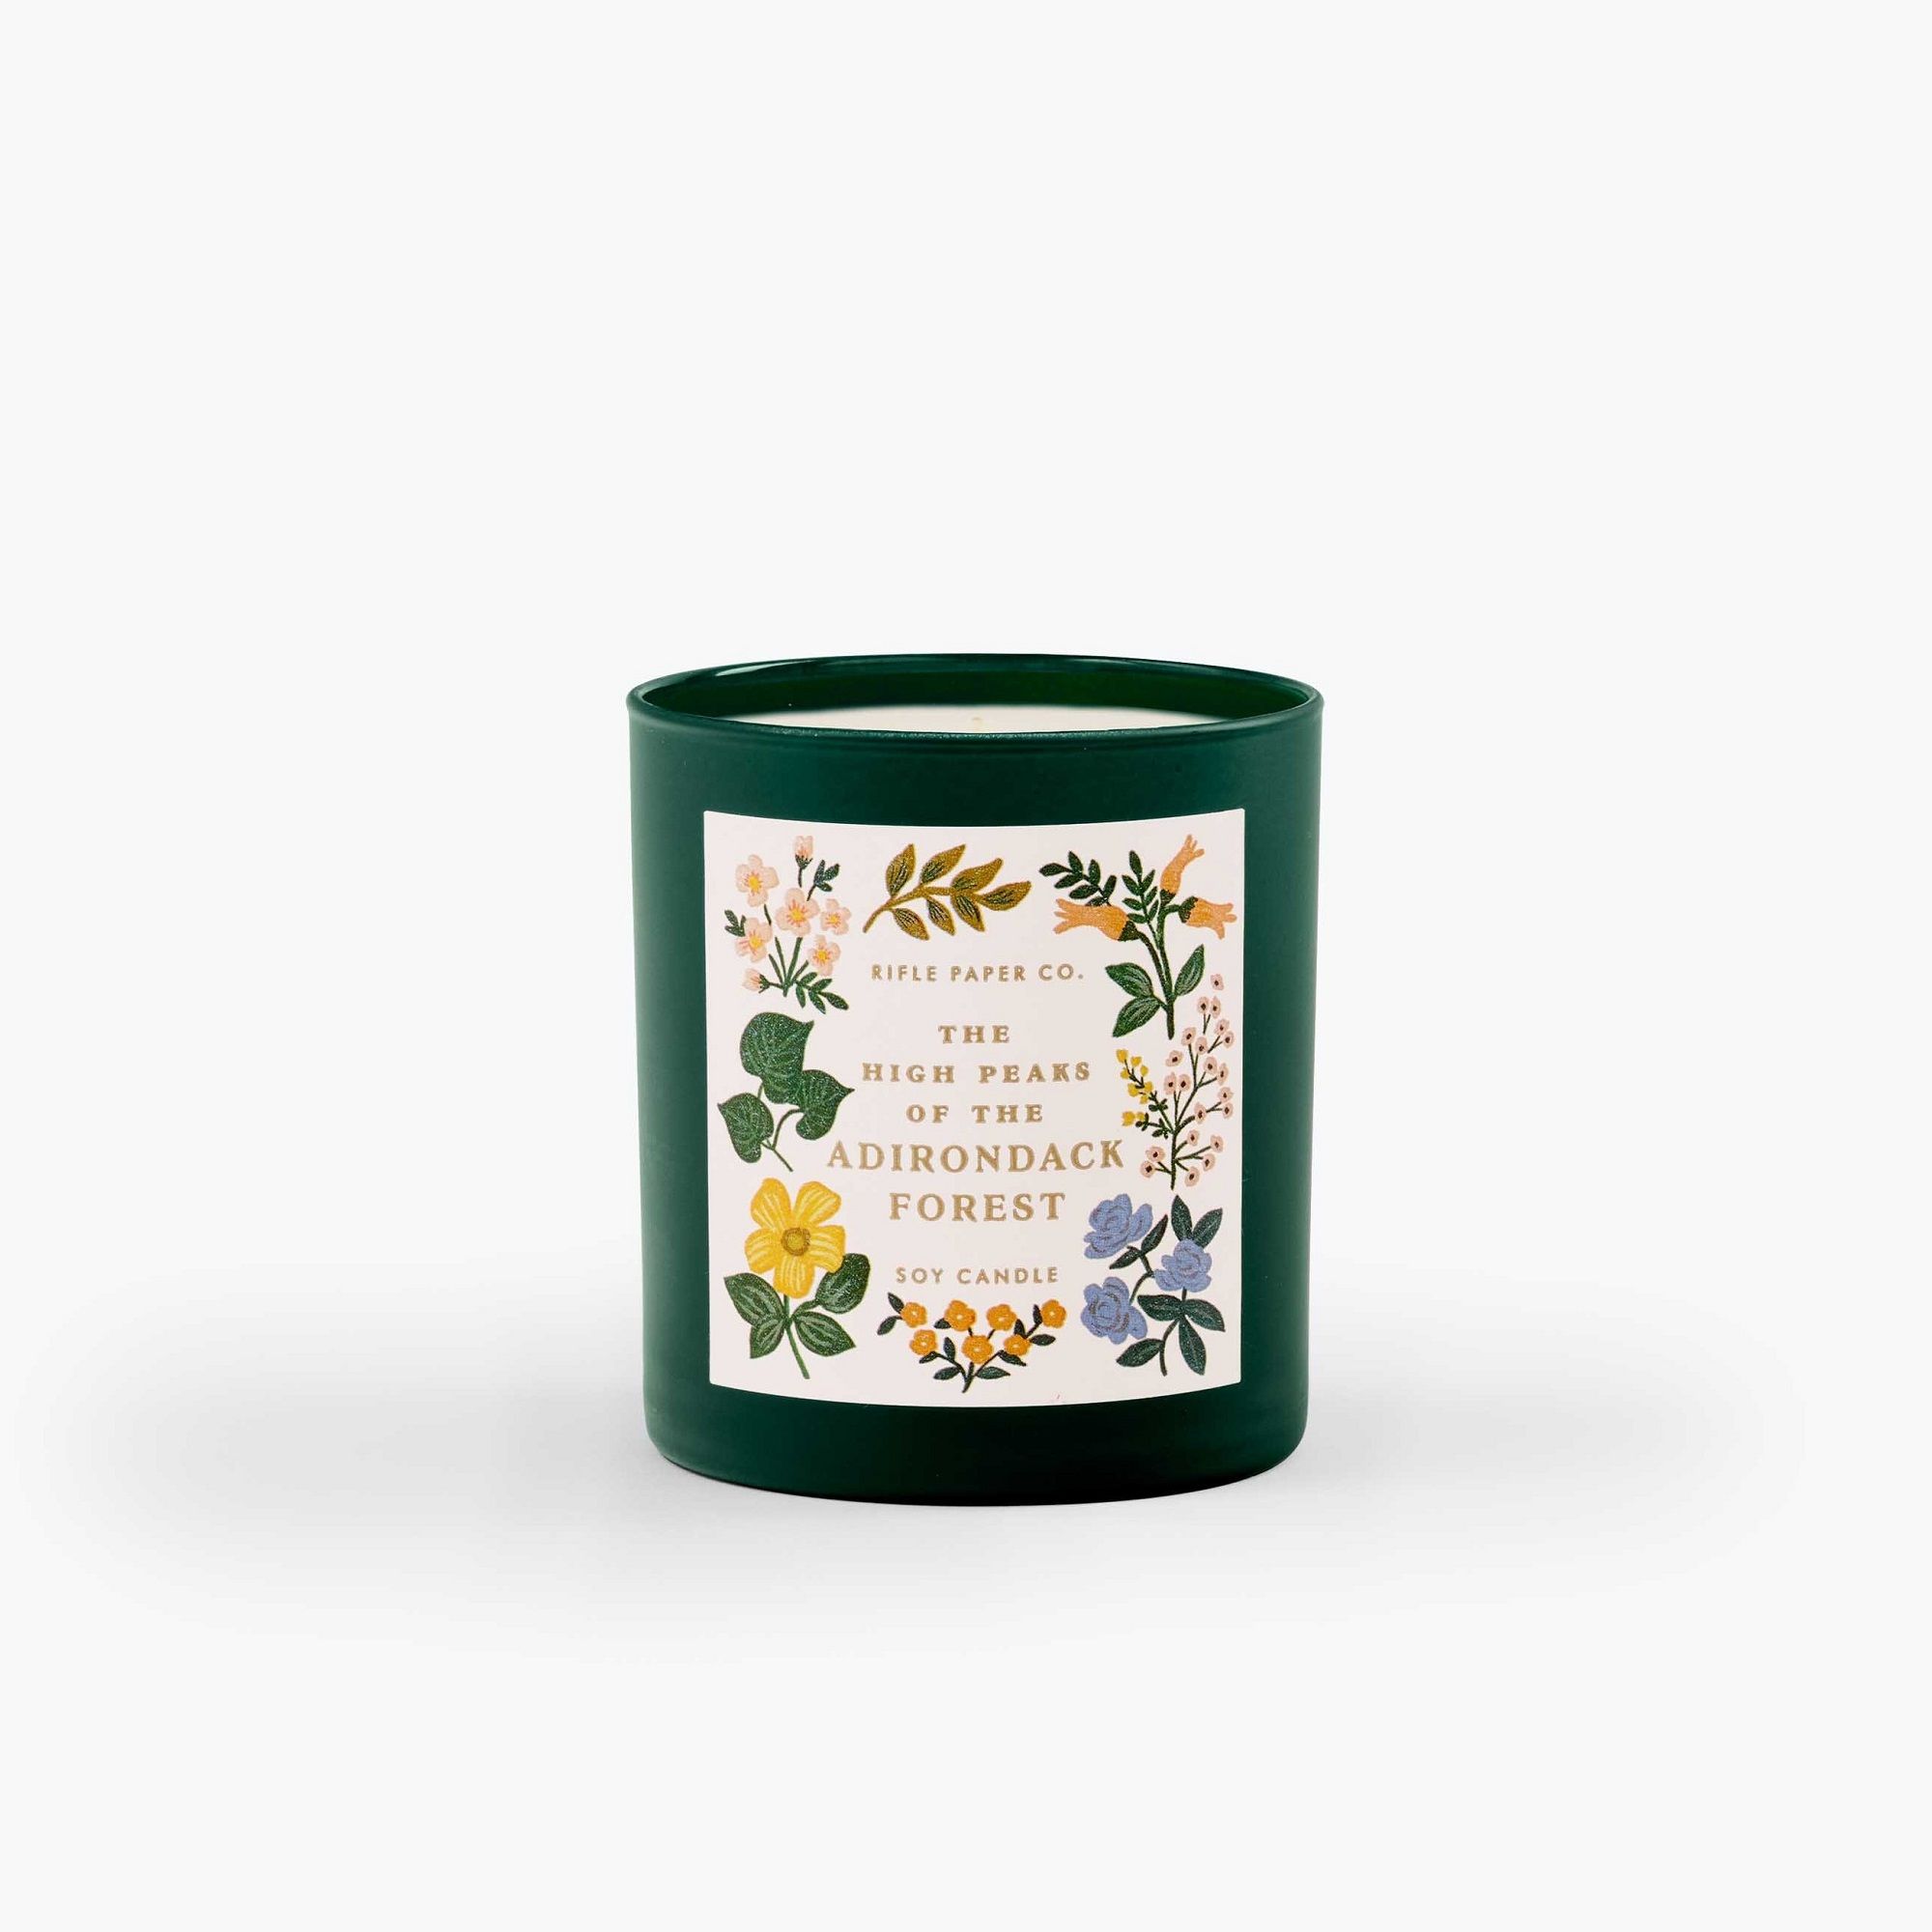 Rifle Paper Co. Candle - High Peaks of the Adirondack Forest